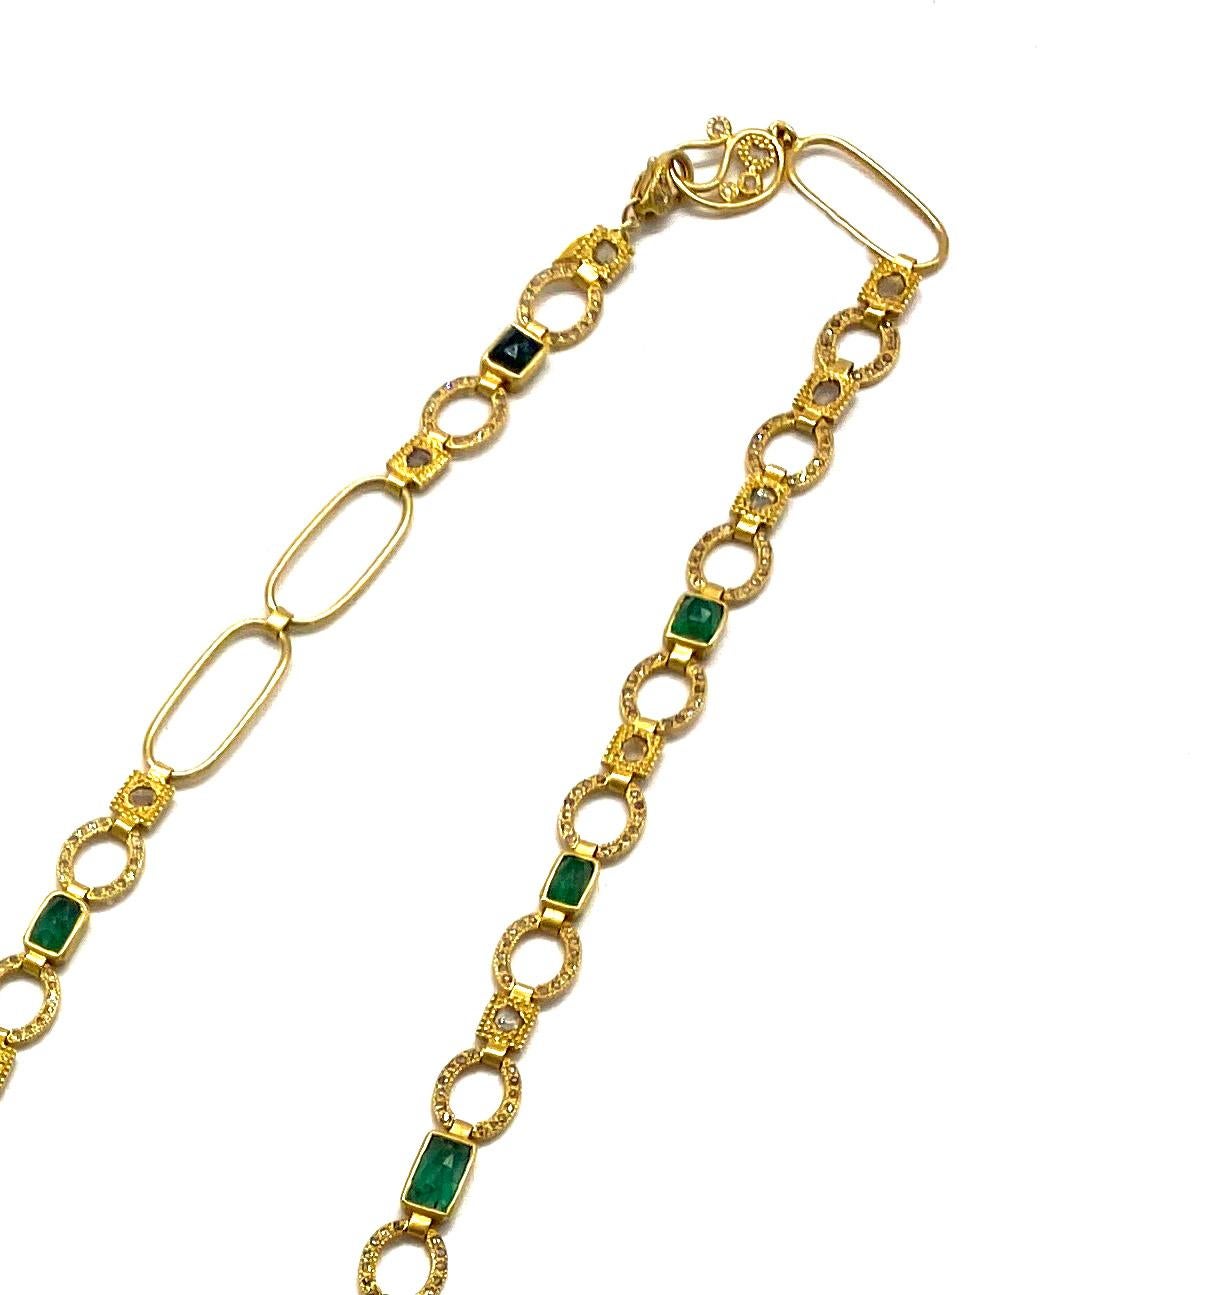 Elegant Art Deco style Mosaic 32 Inch Necklace set in 20 Karat Yellow Gold with Emerald weighing approximately at 19.06cts and Diamonds 4.62cts. Brought to your from the Luminosity Collection which consists of bold design and reflects light from